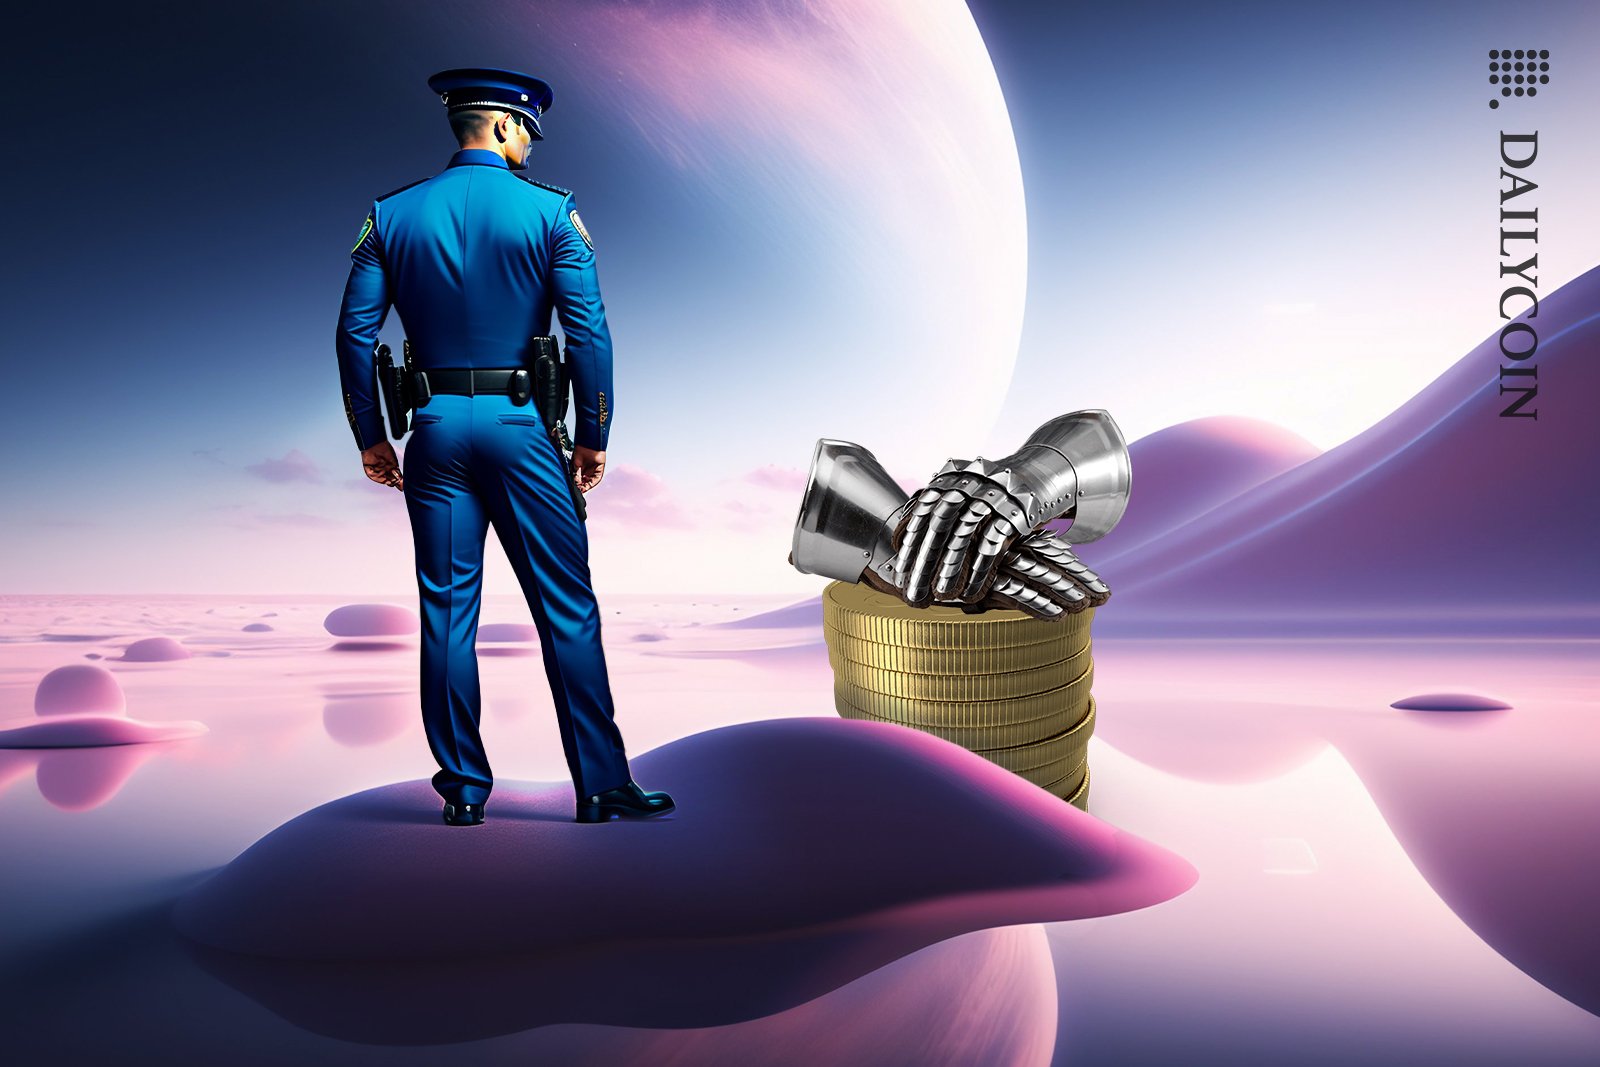 Policeman in outer space looking over two hands on a neatly stacked crypto coins.